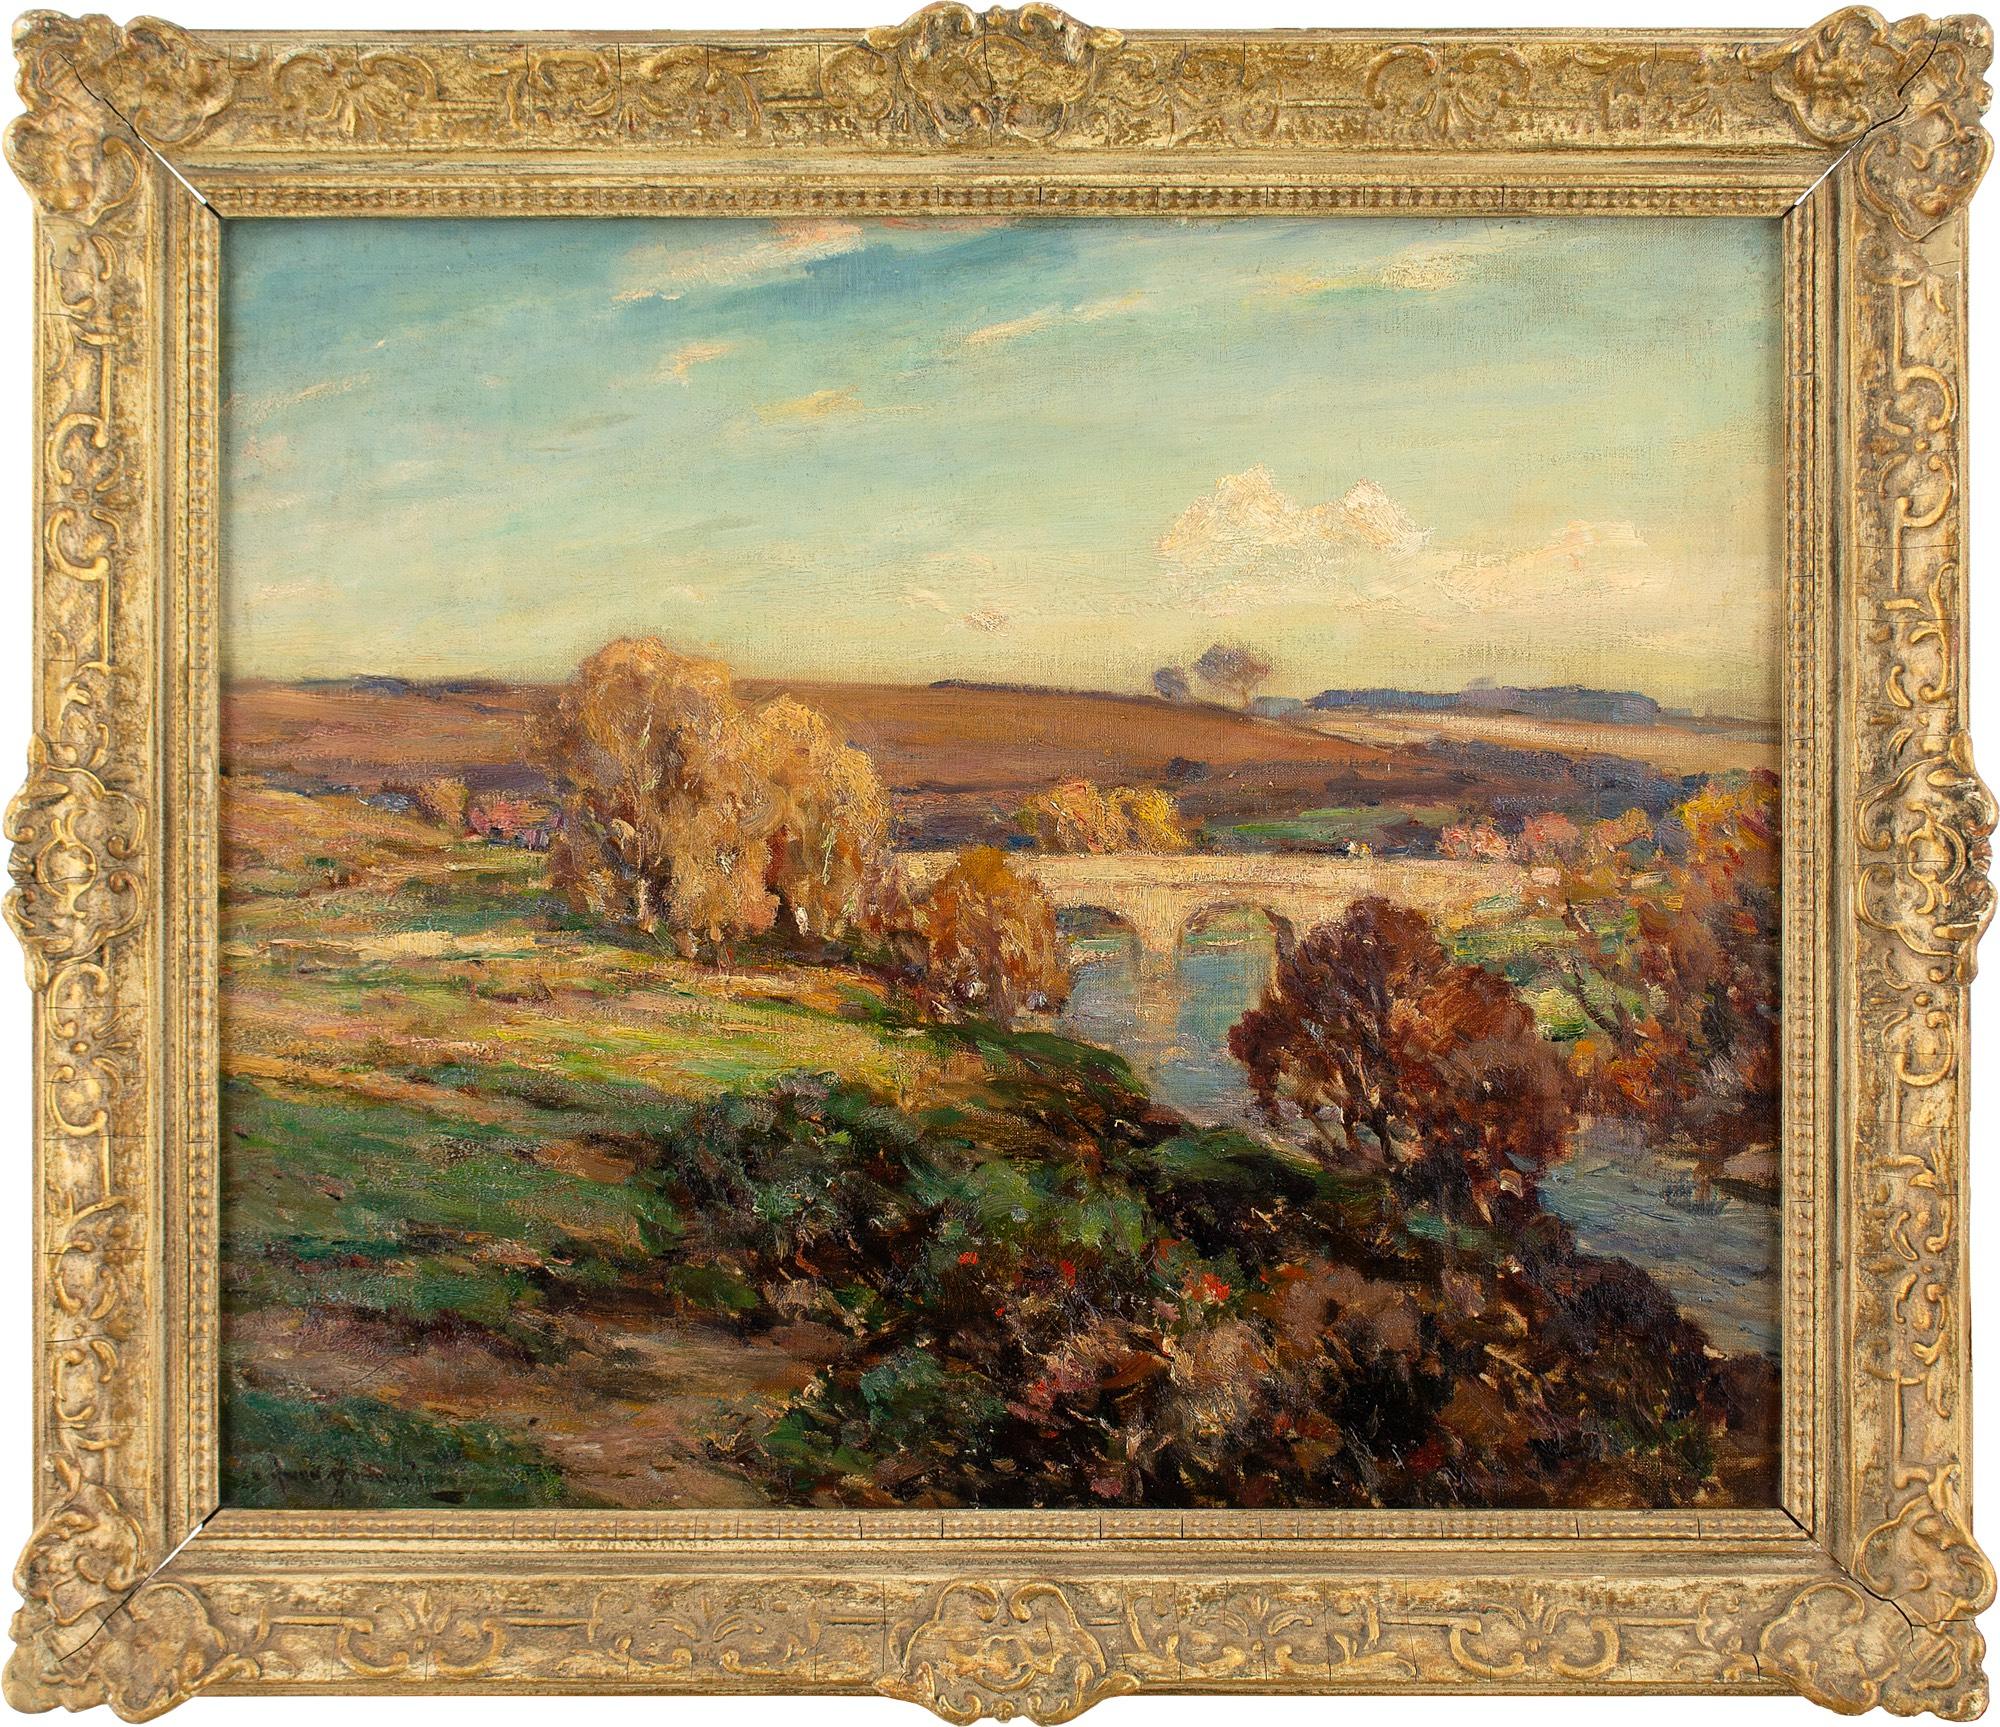 This early 20th-century oil painting by British artist Owen Bowen (1873-1967) depicts a picturesque view on the River Wharfe in Yorkshire.

Imbued with an irrepressible spirit, Bowen approached his works with confidence and dexterity. By 19, he’d